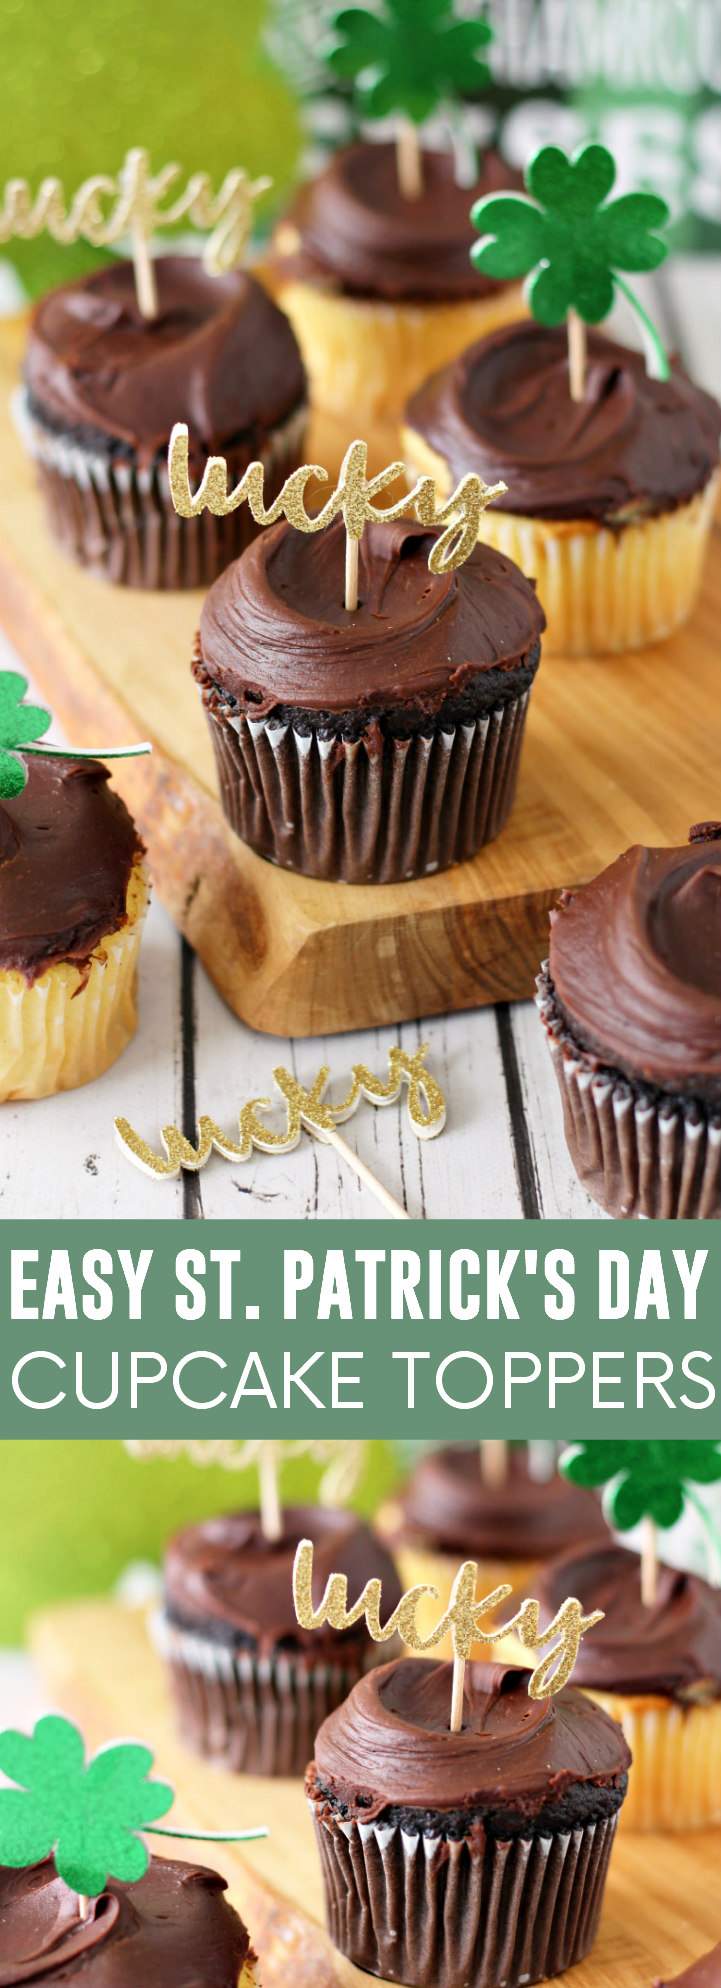 Easy St. Patrick's Day Cupcake Toppers pinnable image